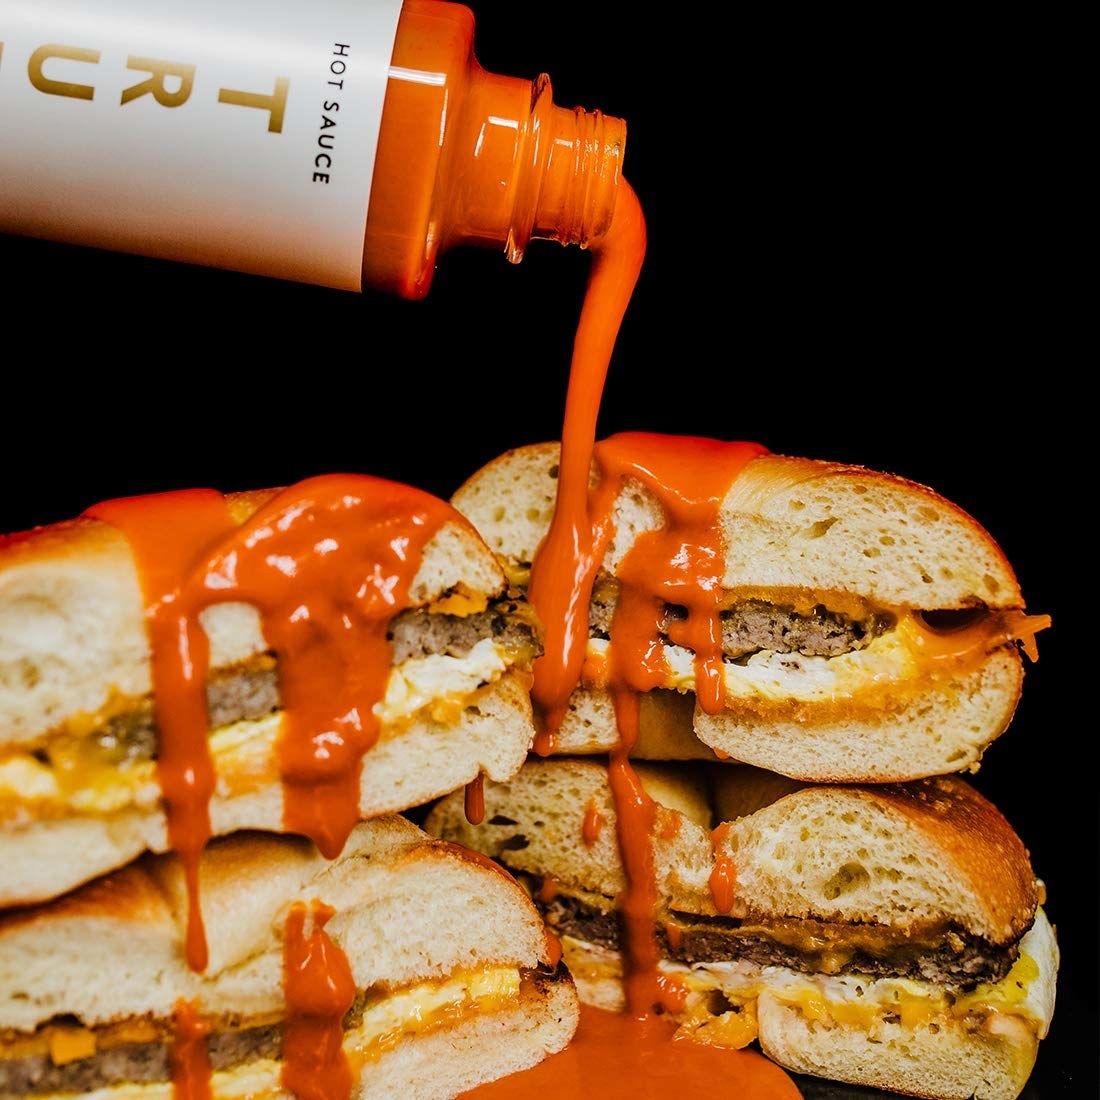 the hot sauce being poured on a stack of sandwiches